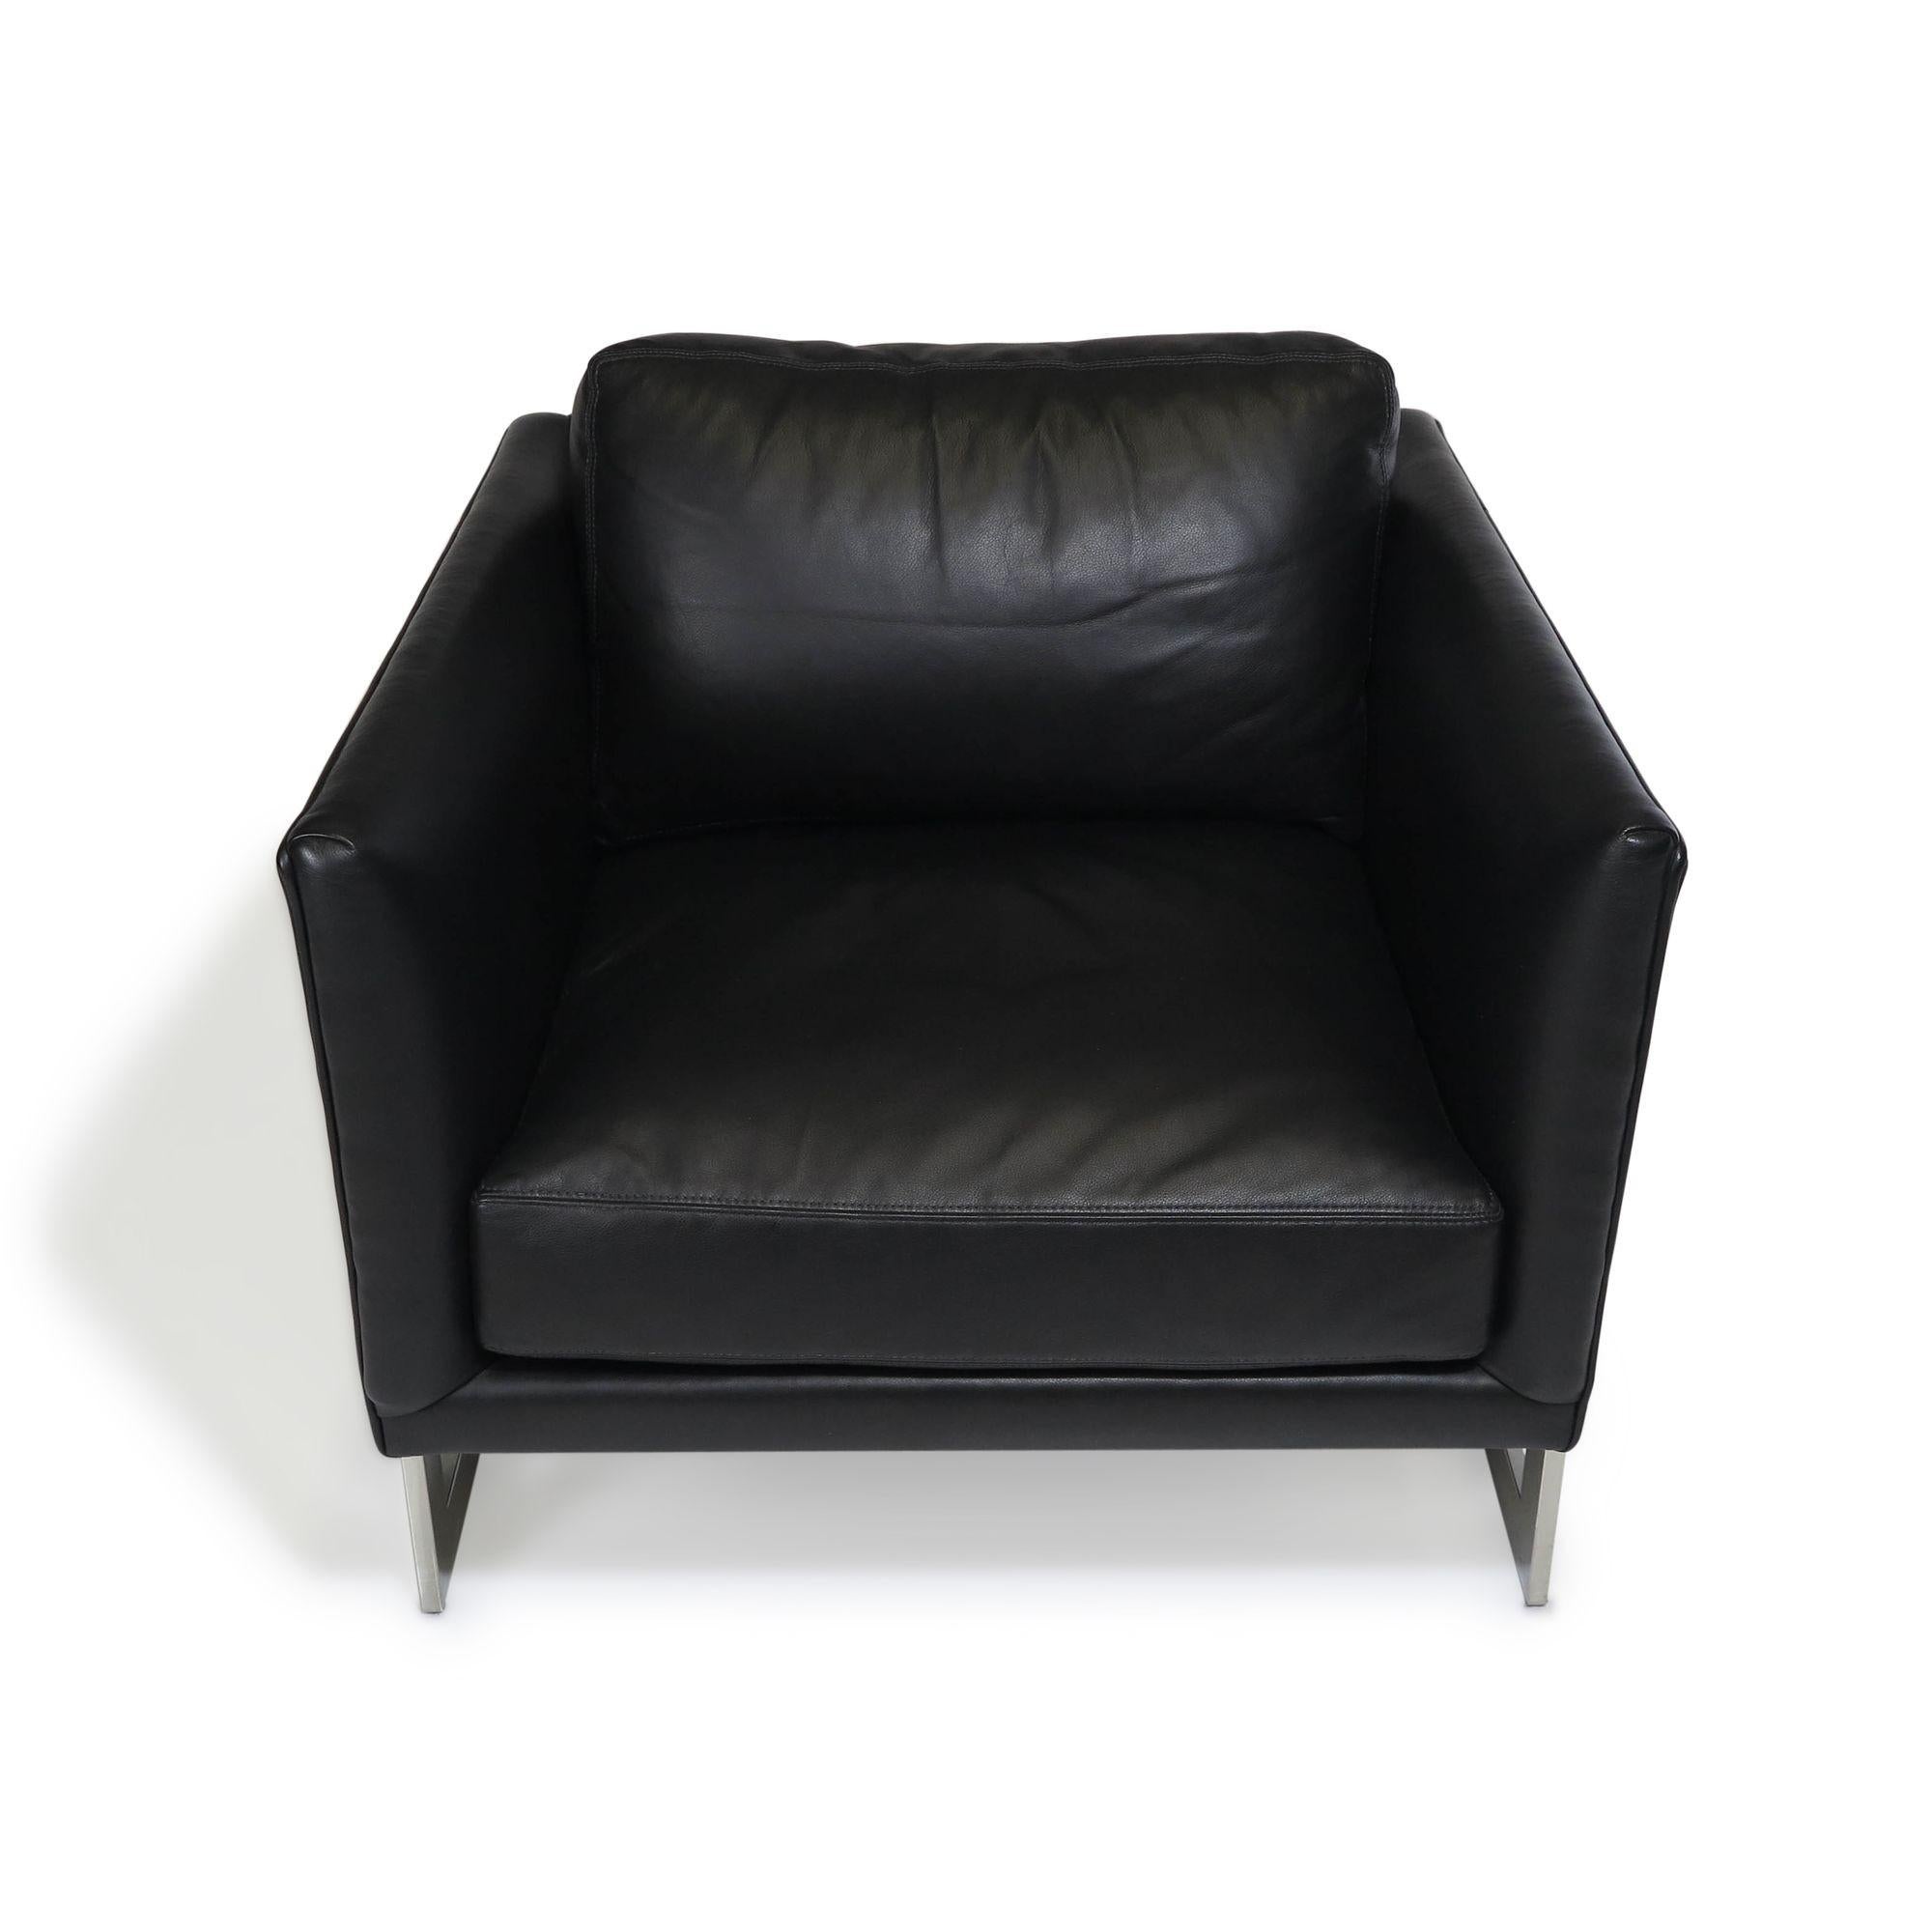 20th Century Milo Baughman Black Leather and Chrome Lounge Chair for Thayer Coggin For Sale